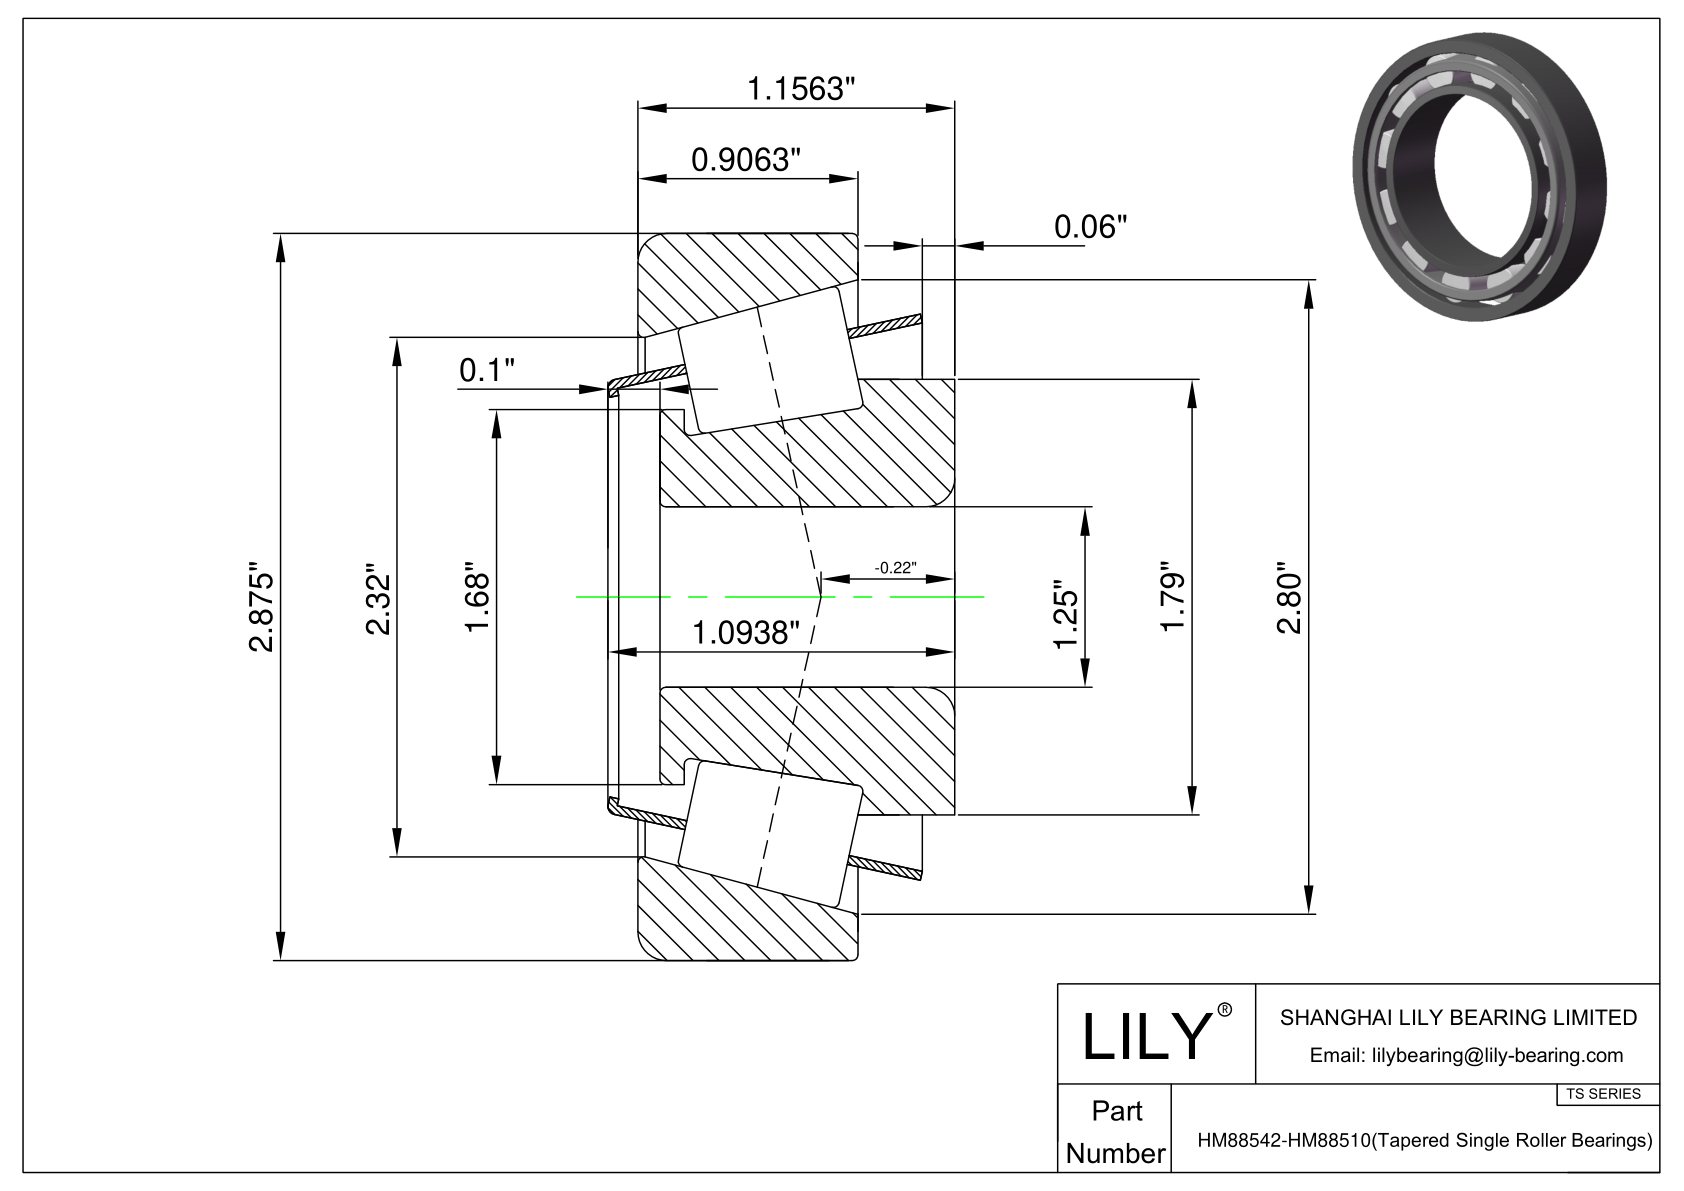 HM88542-HM88510 TS (Tapered Single Roller Bearings) (Imperial) cad drawing